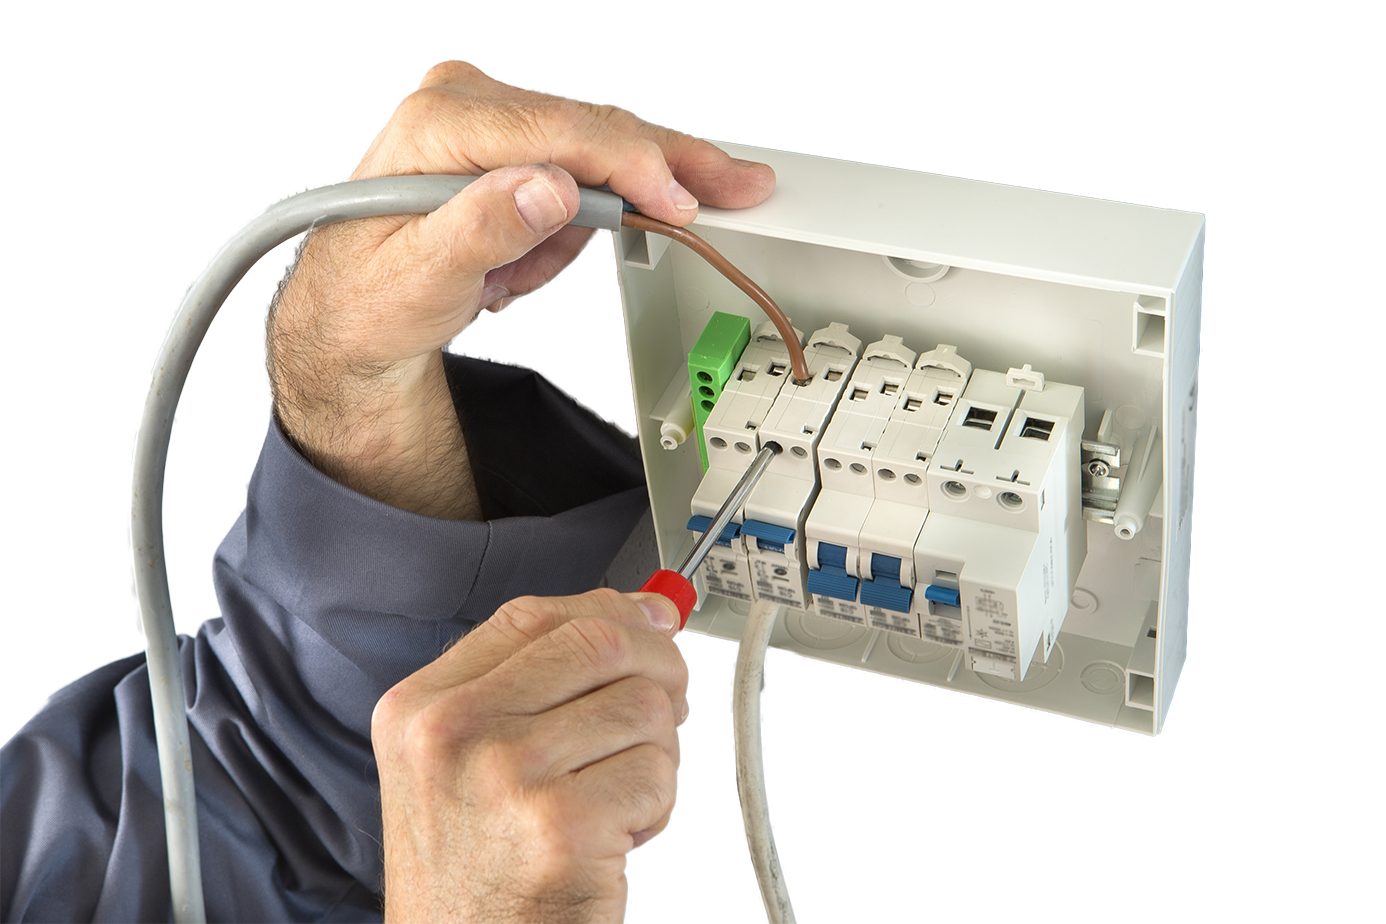 Electrical Services in Powys, Wales